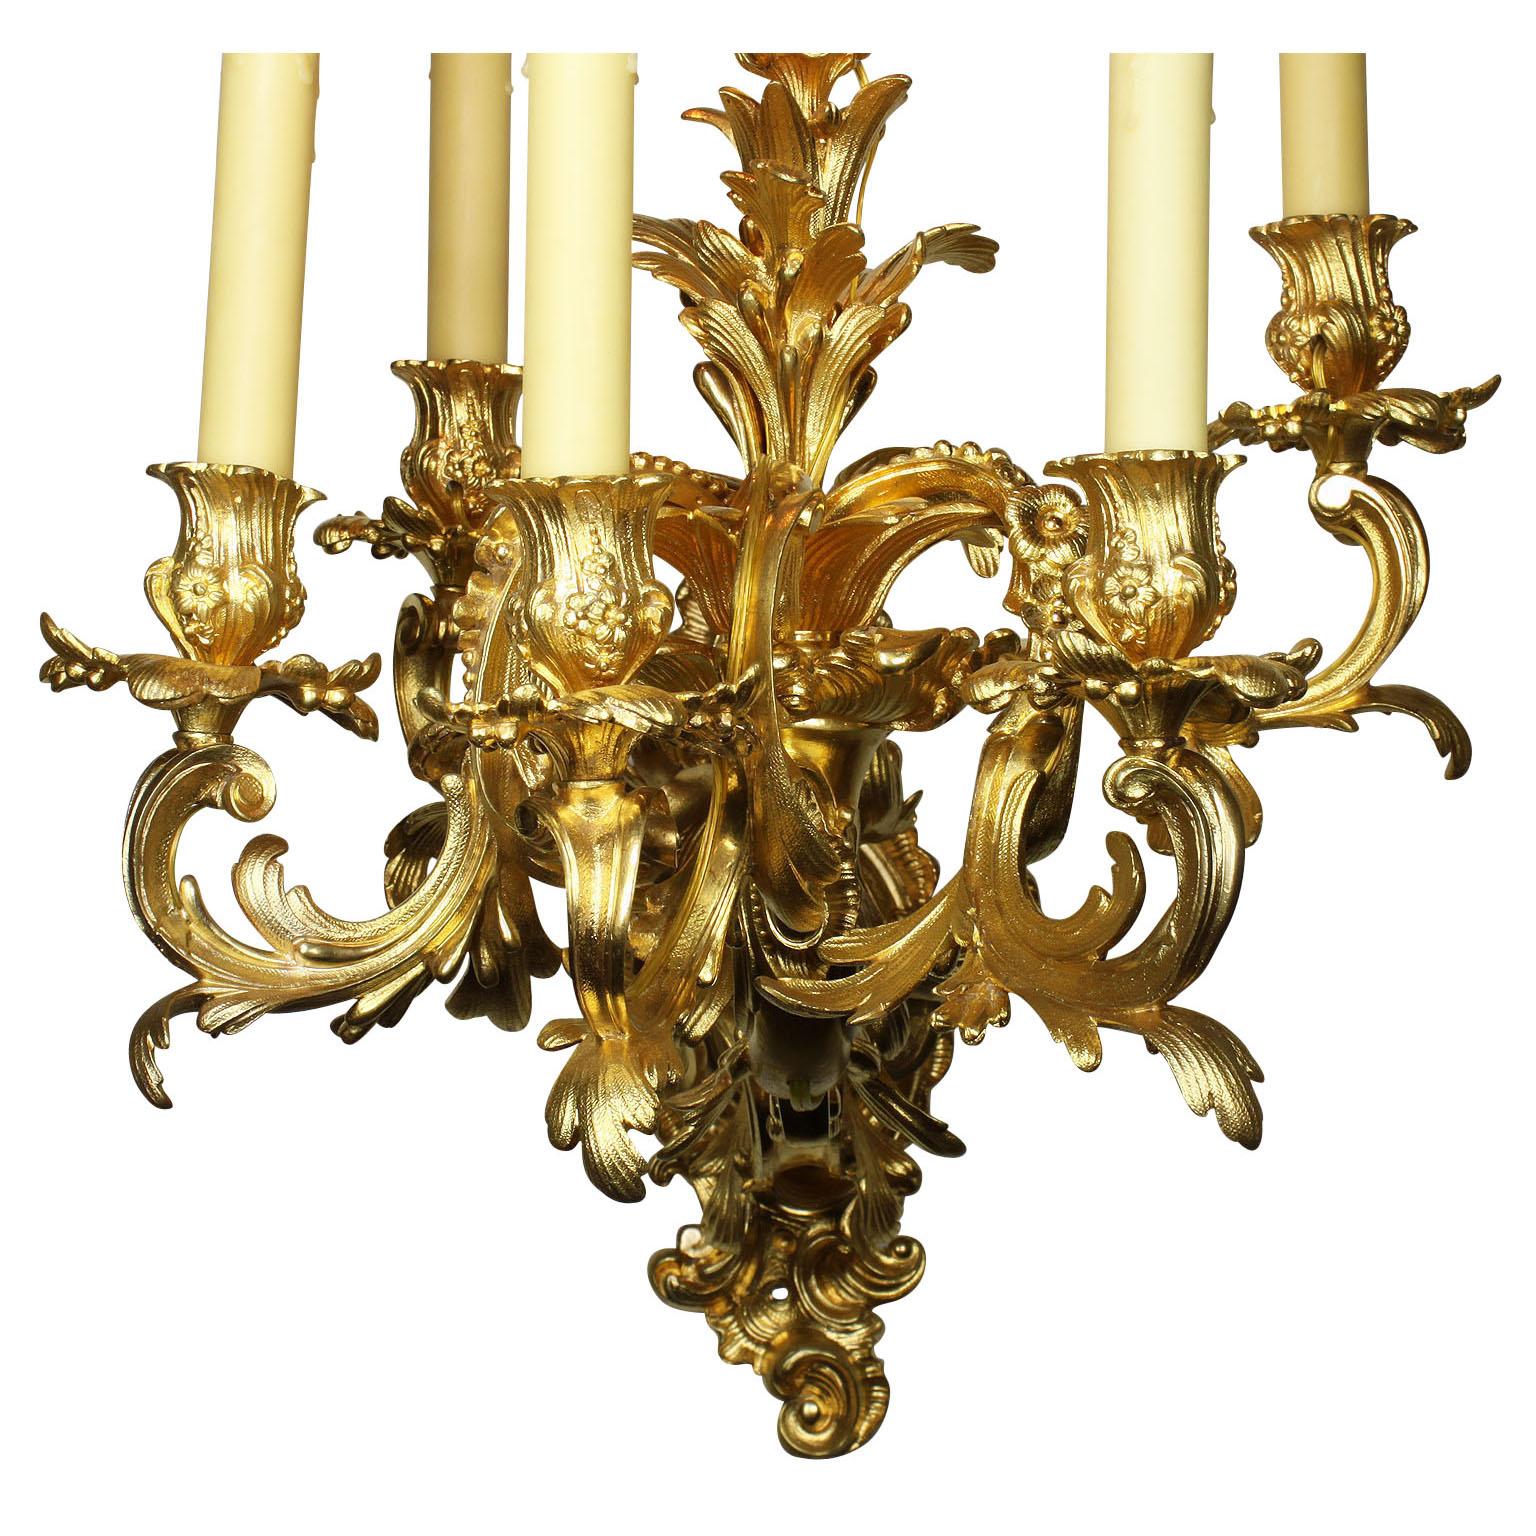 French 19th Century Louis XV Style Rococo Gilt-Bronze Wall Lights Sconces, Pair For Sale 1